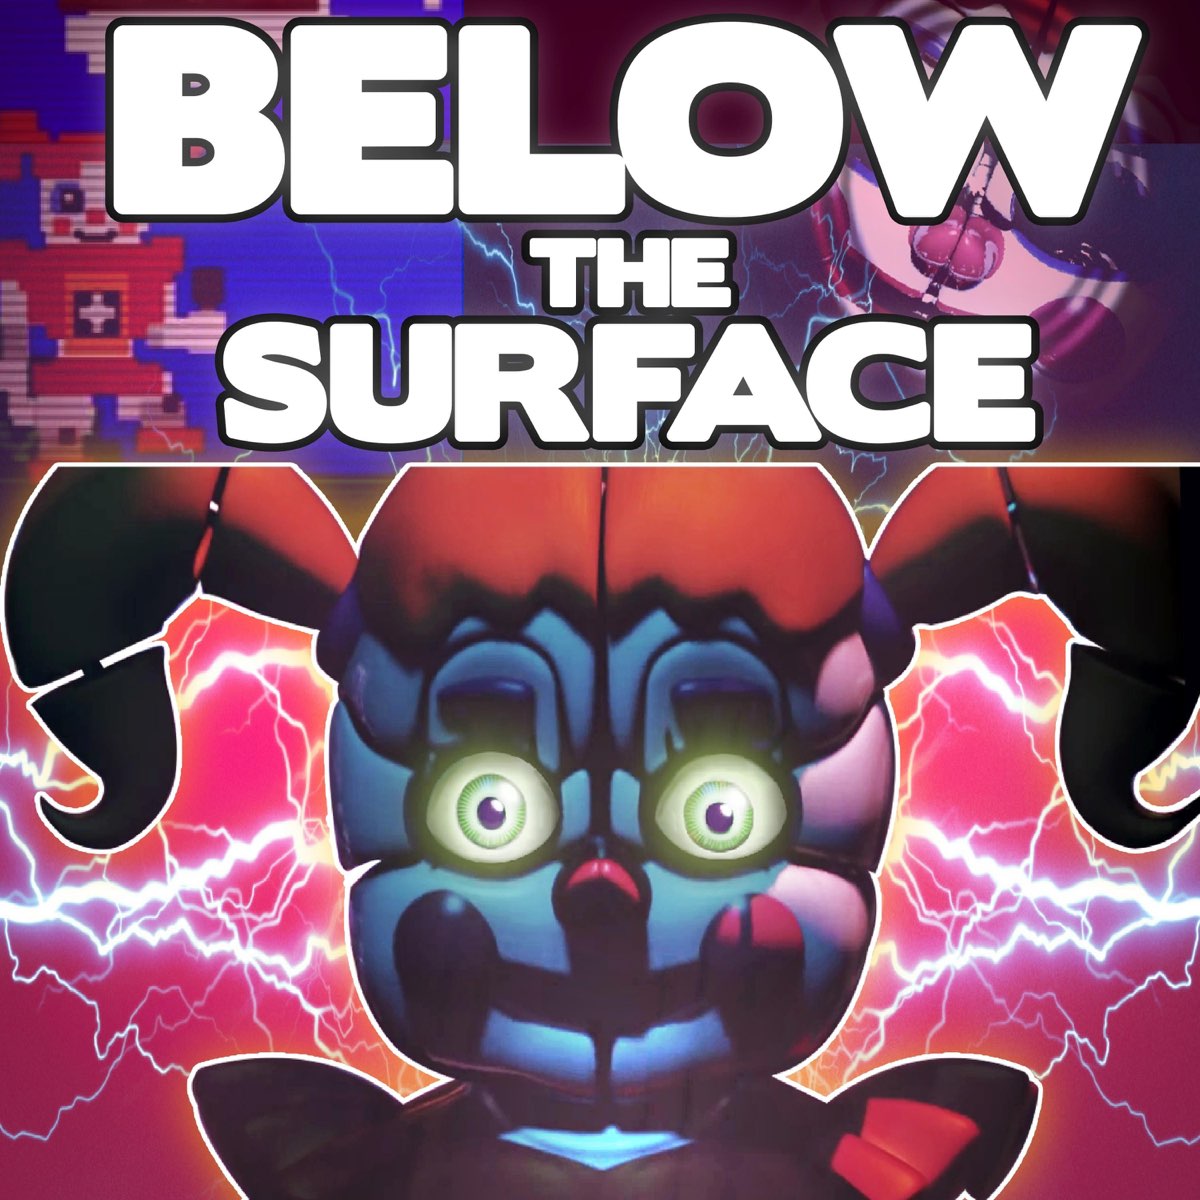 Below the surface текст. Below the surface. Below the surface FNAF обложка. Below the surface ФНАФ. Гриффинилла.